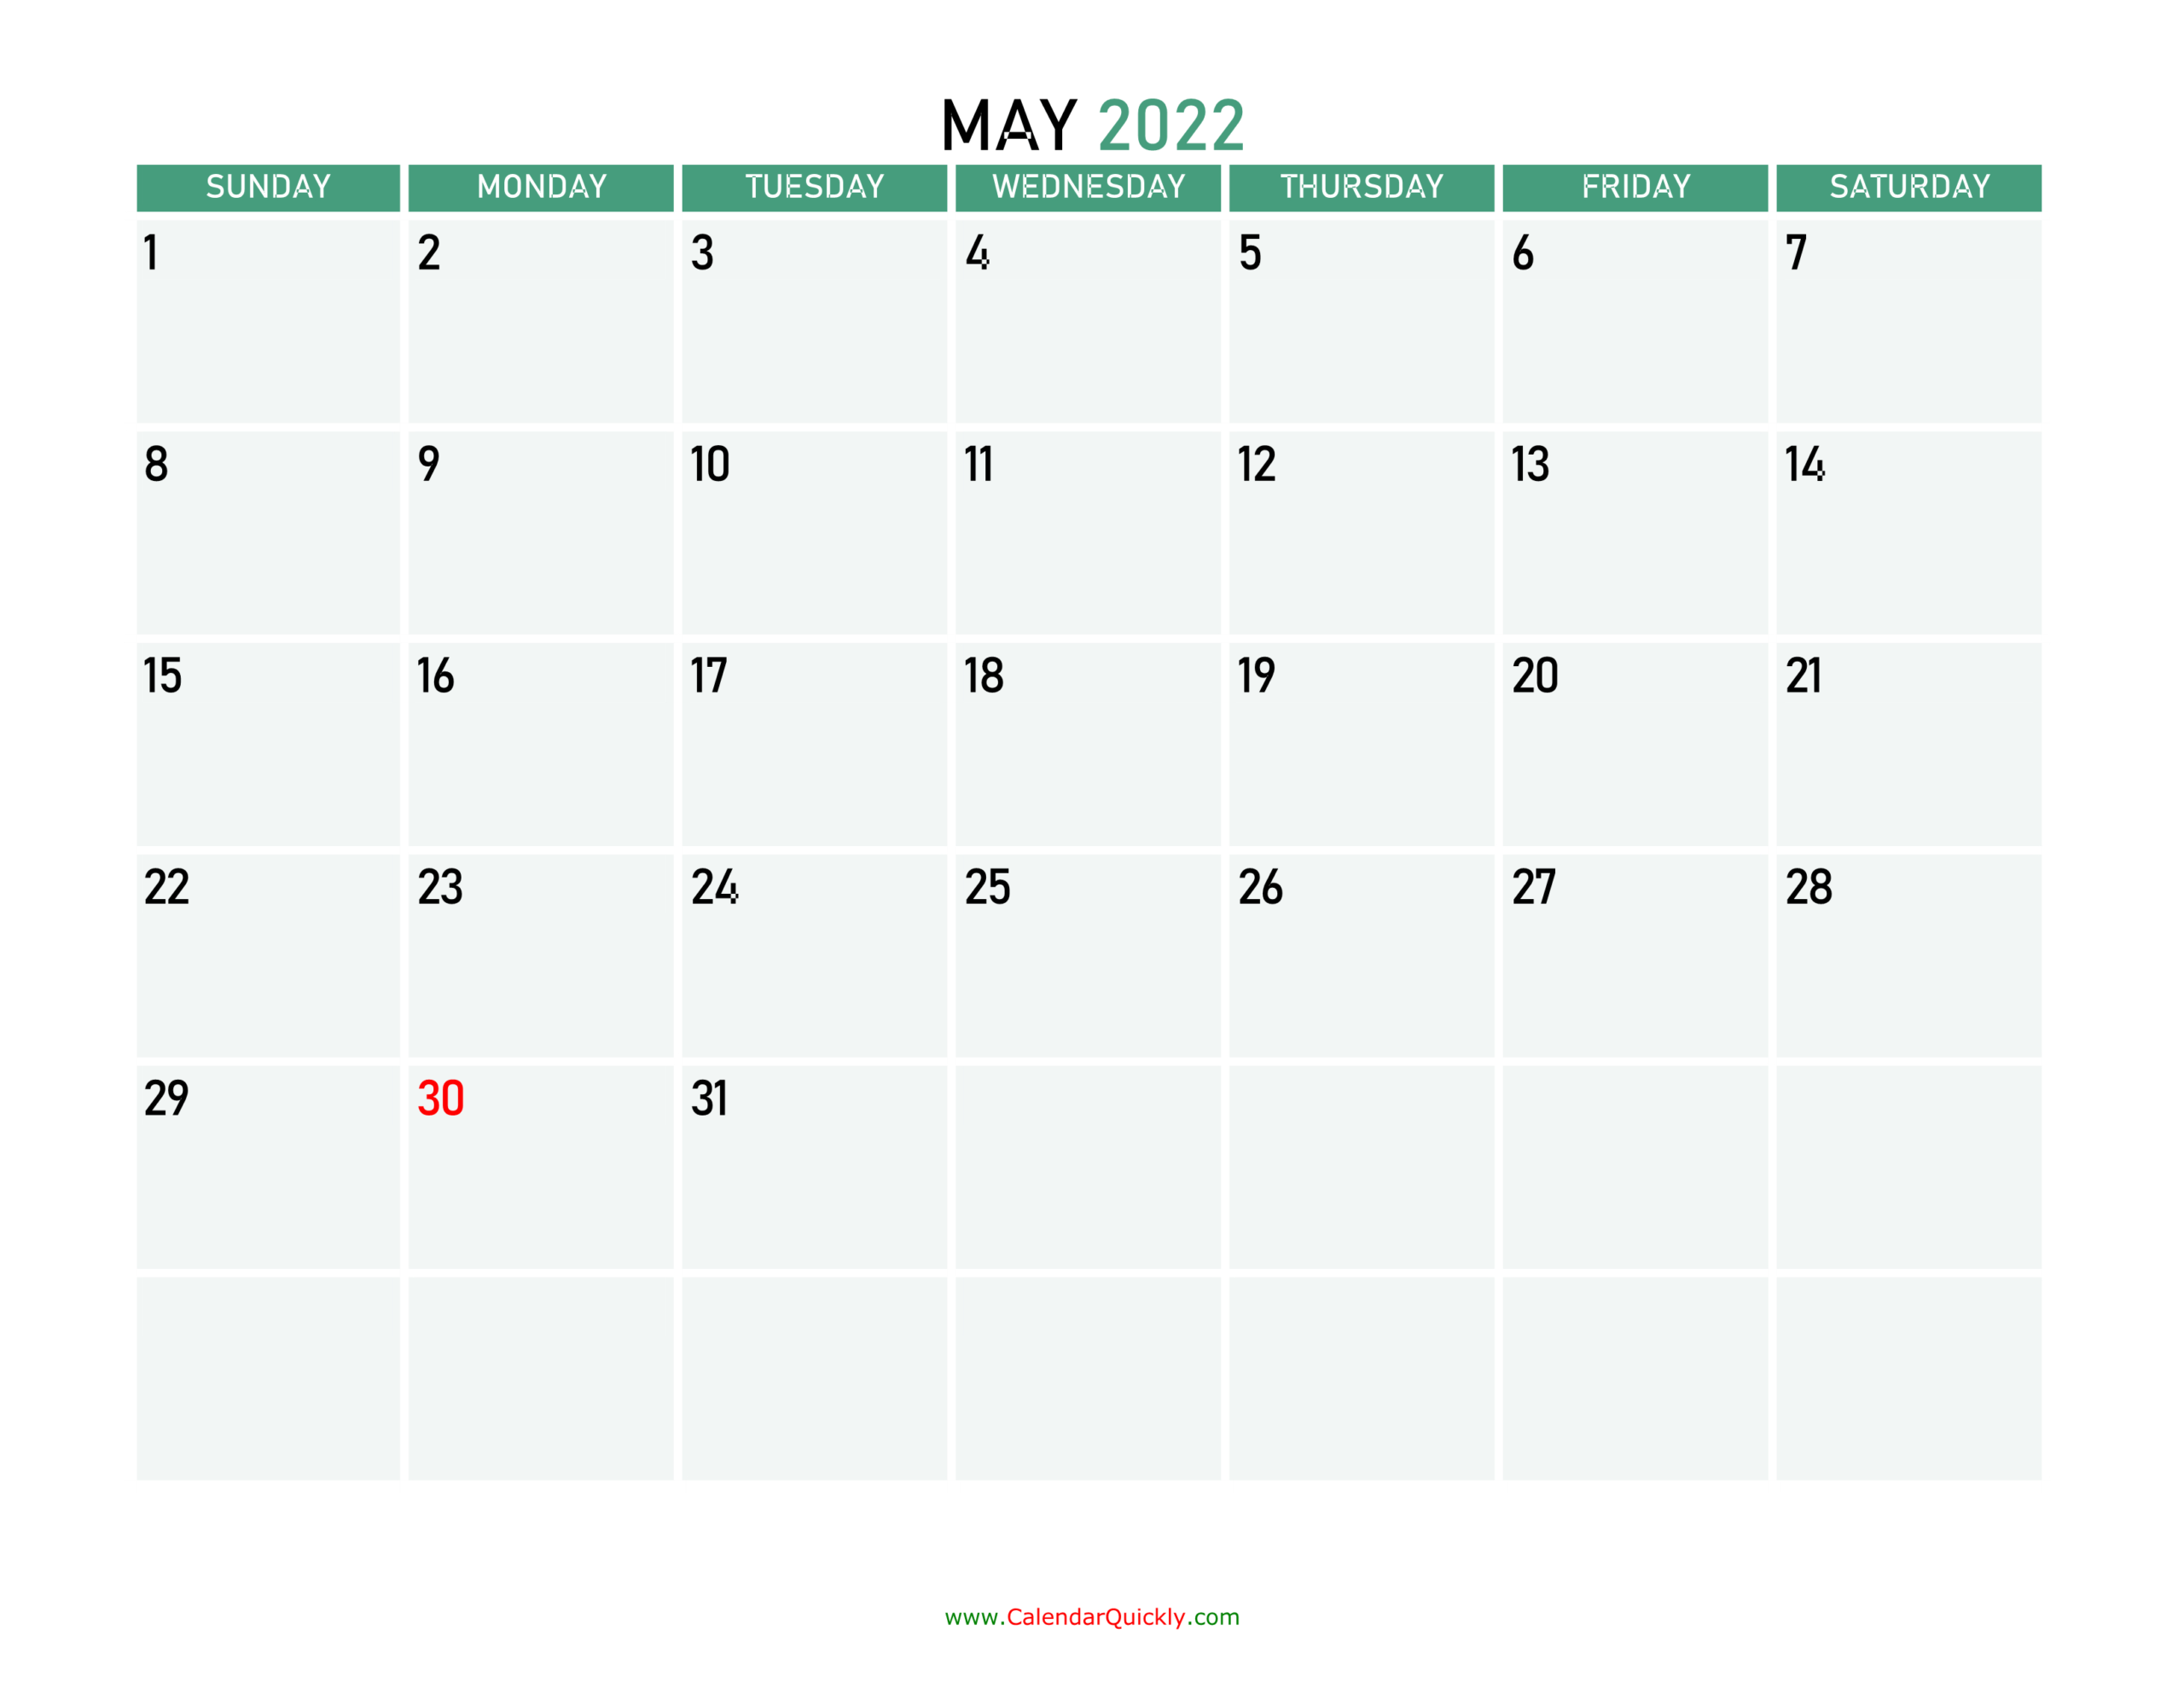 May 2022 Printable Calendar | Calendar Quickly  How Many Weeks From April 2022 To March 2022